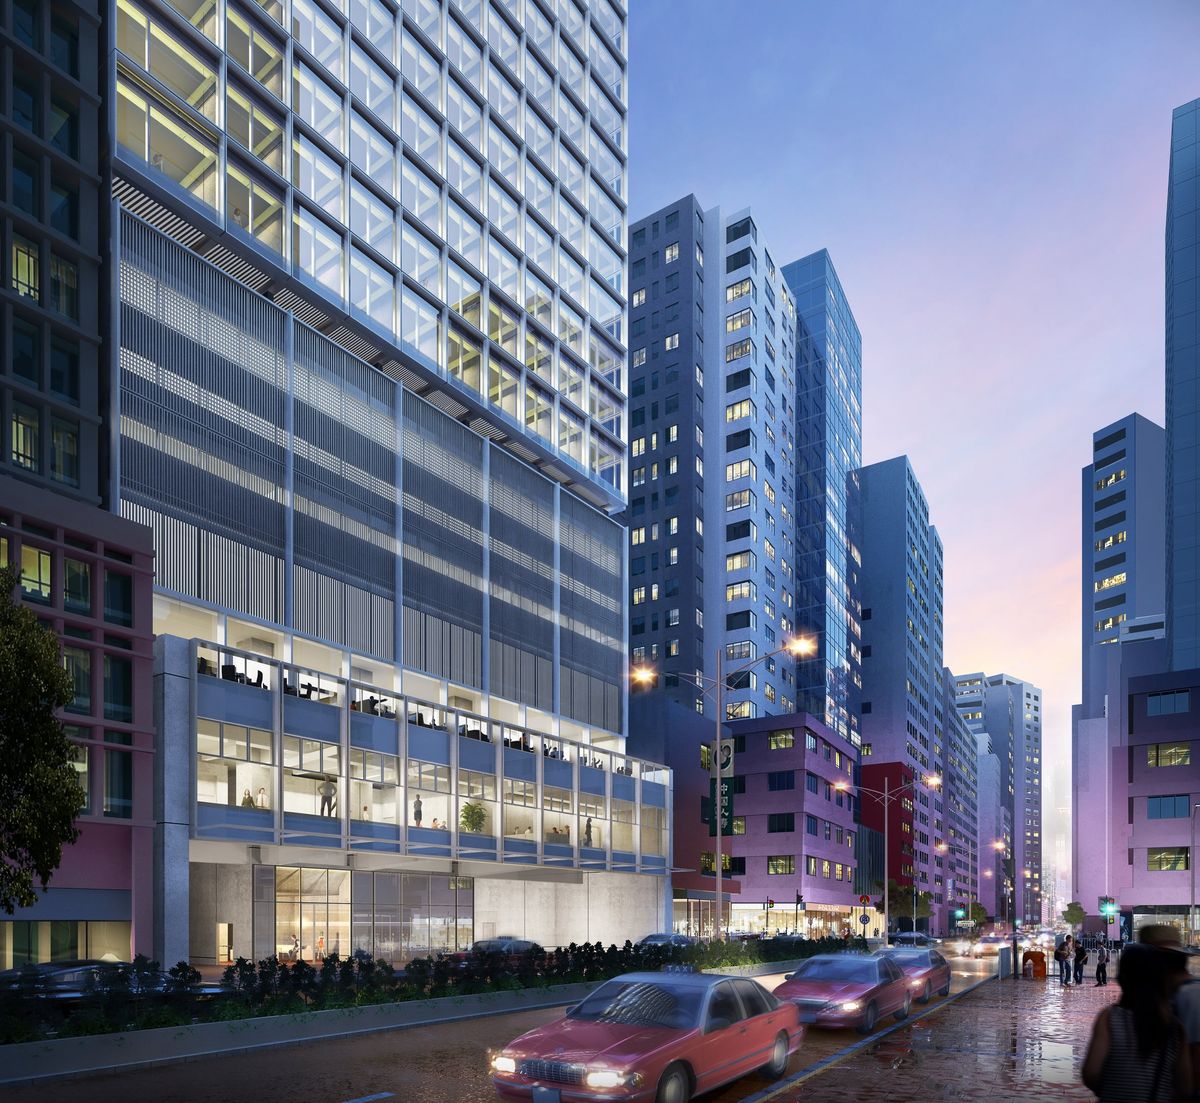 Exploring Hong Kong’s Hari Hotel – new luxury digs coming soon in “Asia’s World City”